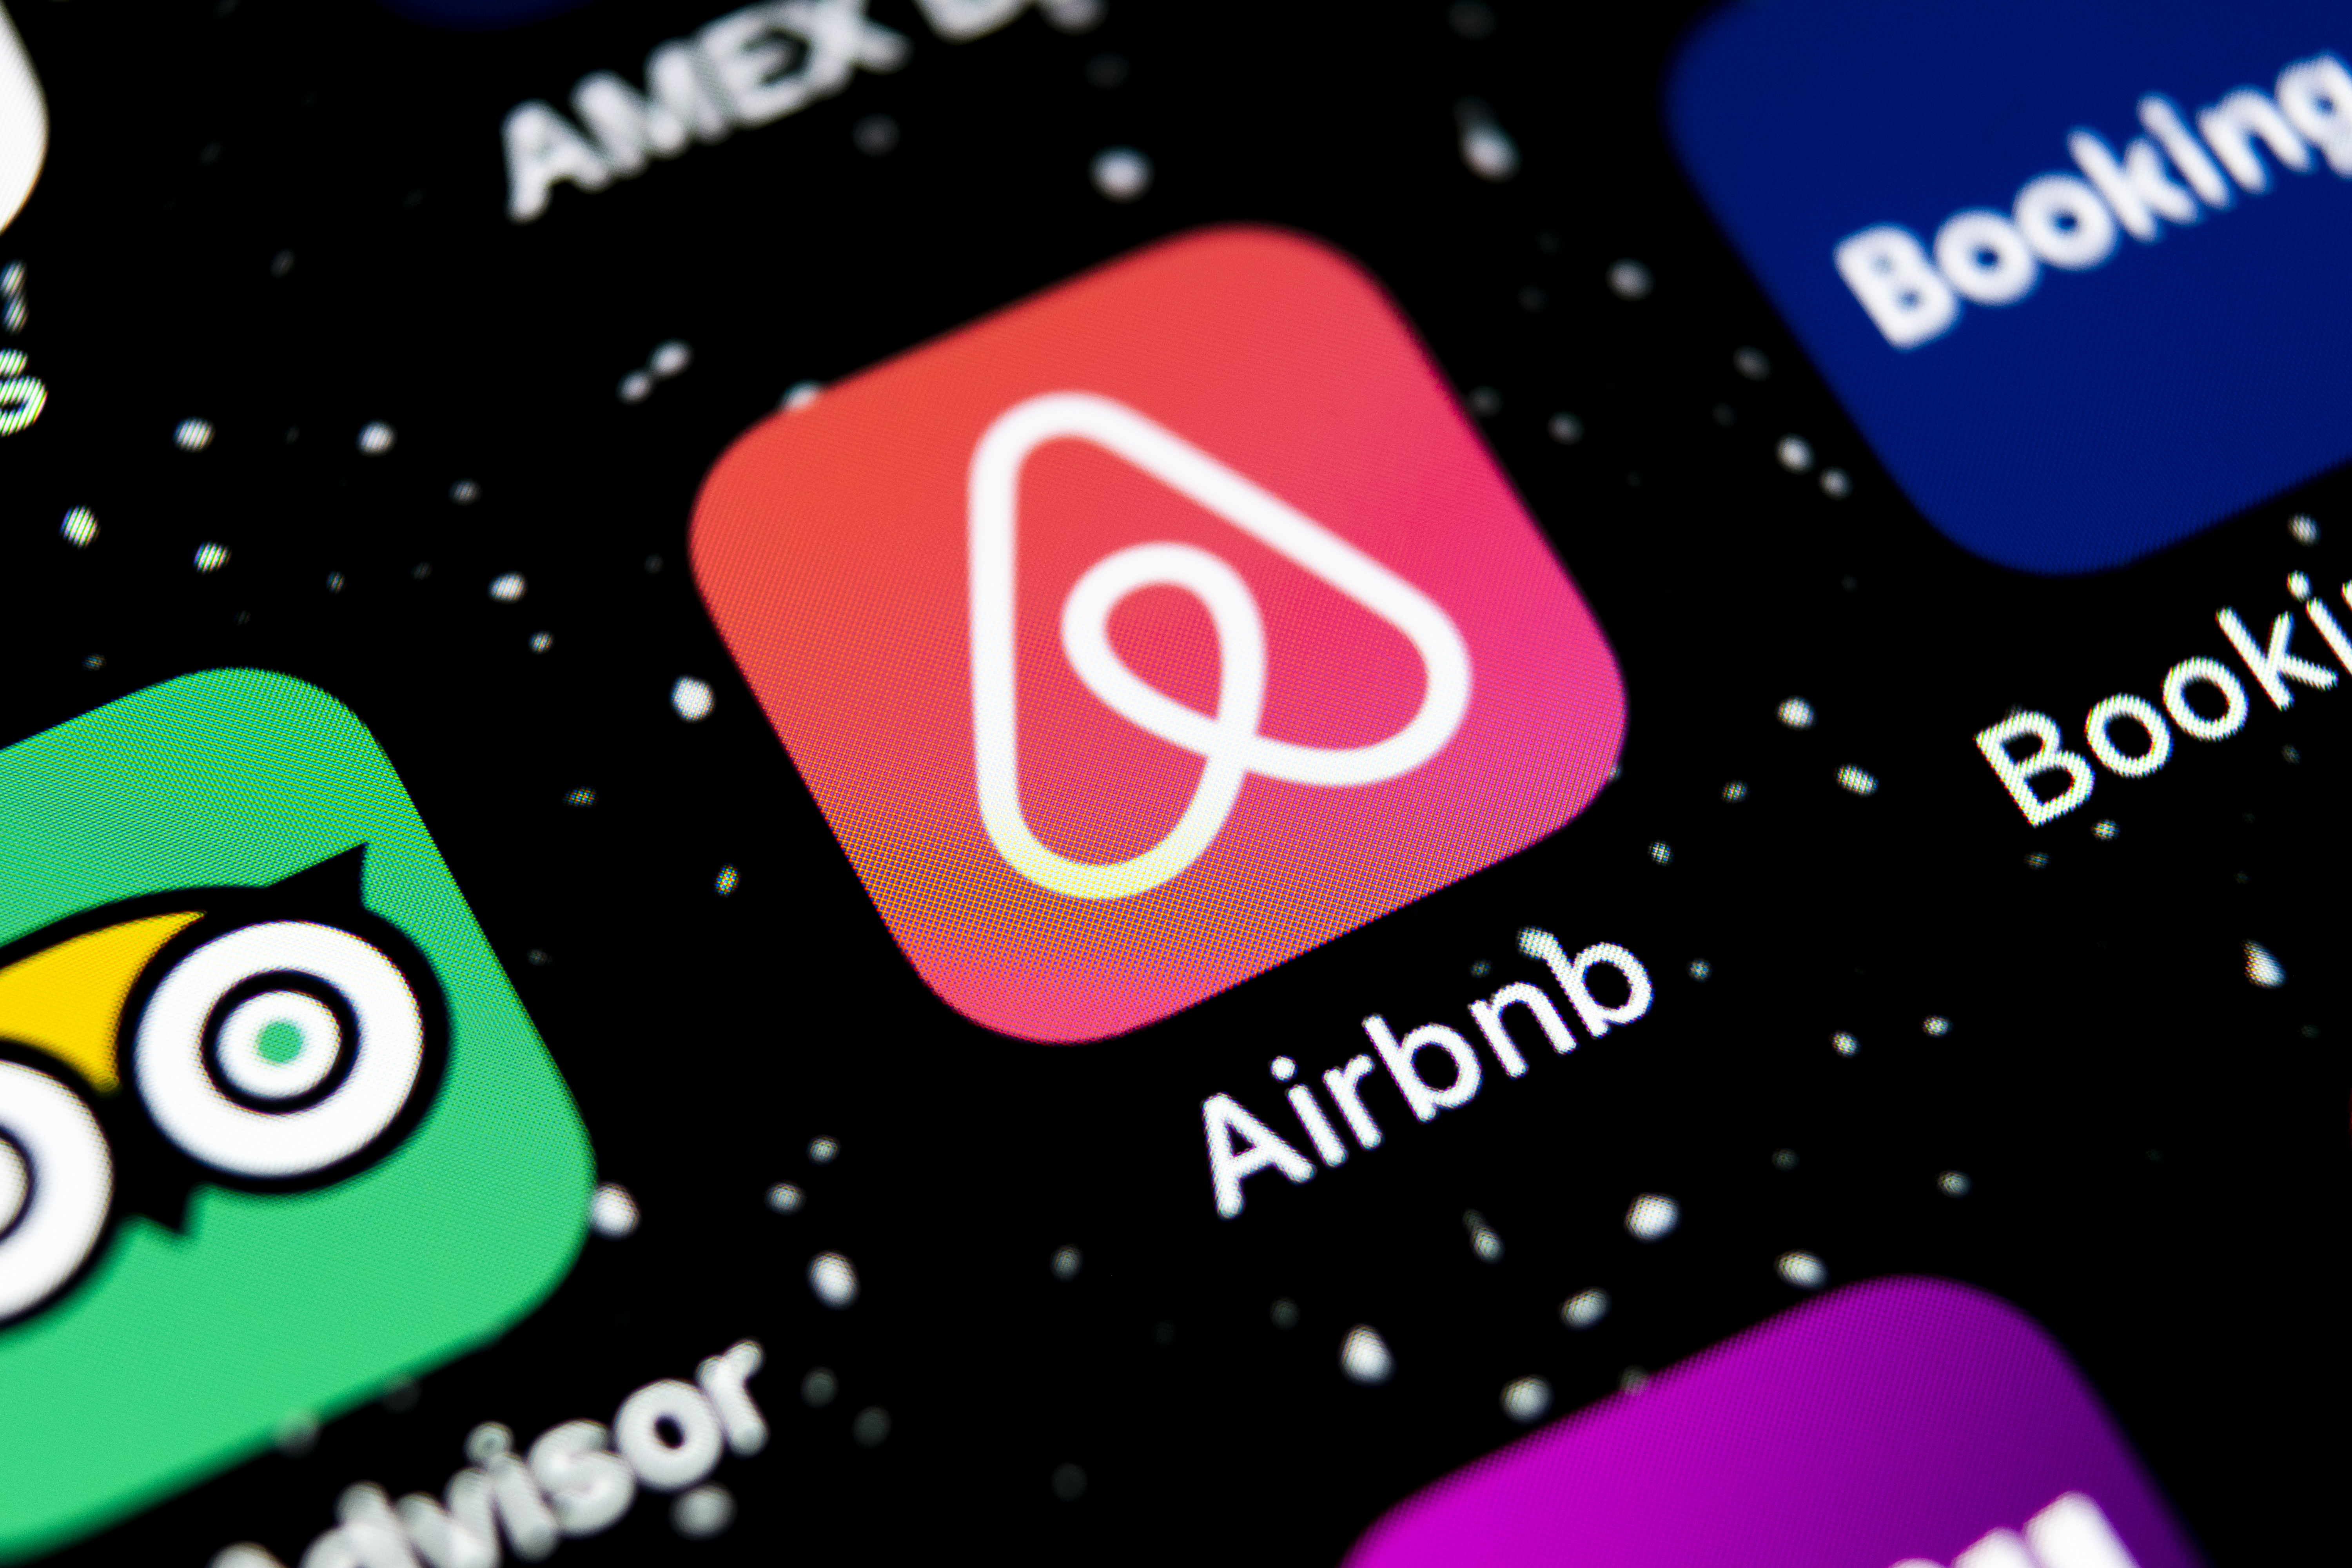 Sankt-Petersburg, Russia, February 3, 2019: Airbnb application icon on Apple iPhone X screen close-up. Airbnb app icon. Airbnb.com is online website for booking rooms. social media network.